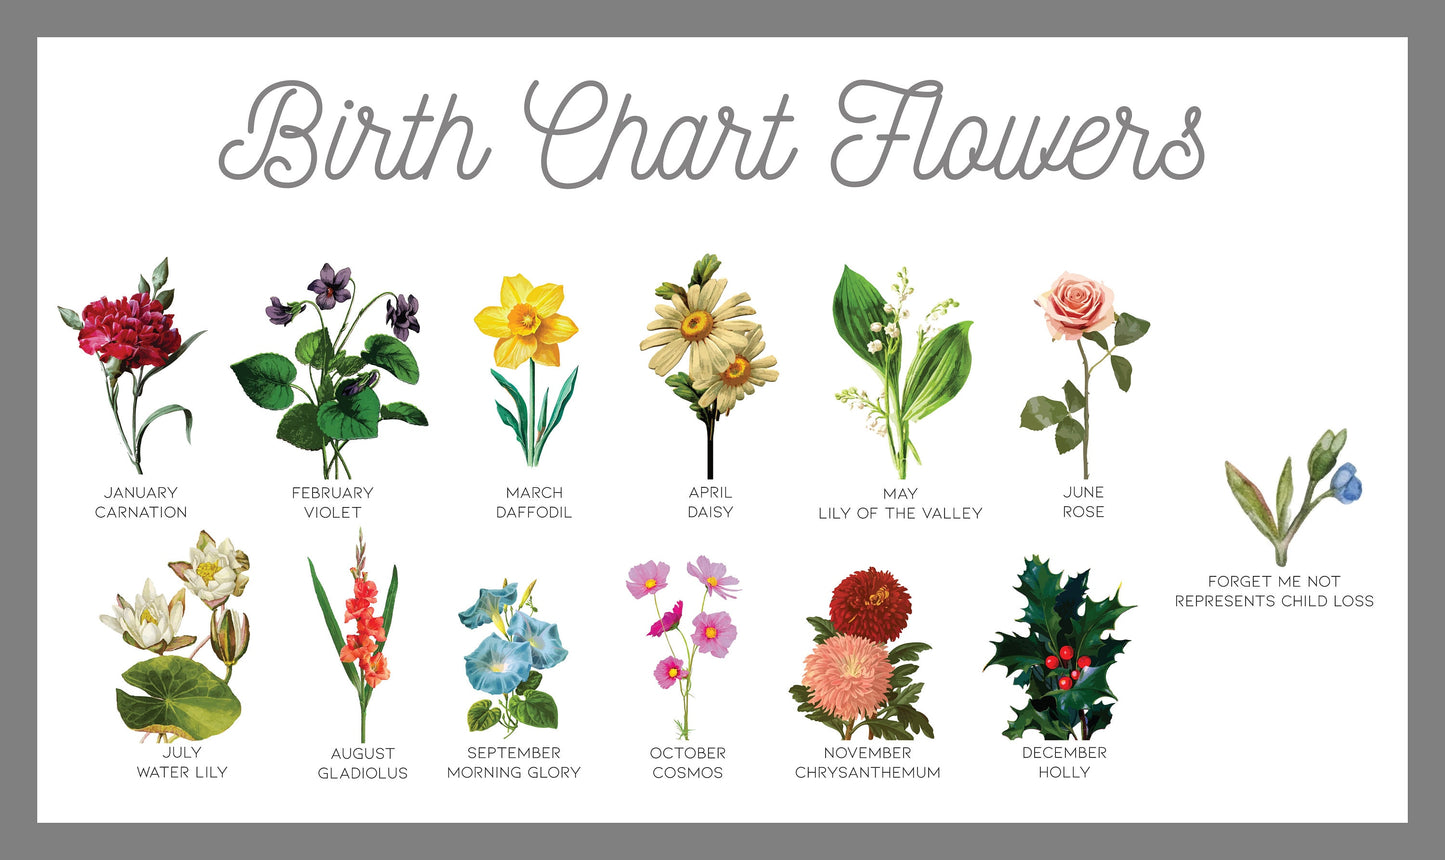 Personalized Birth Flower Print - Personalized Garden Print Gift